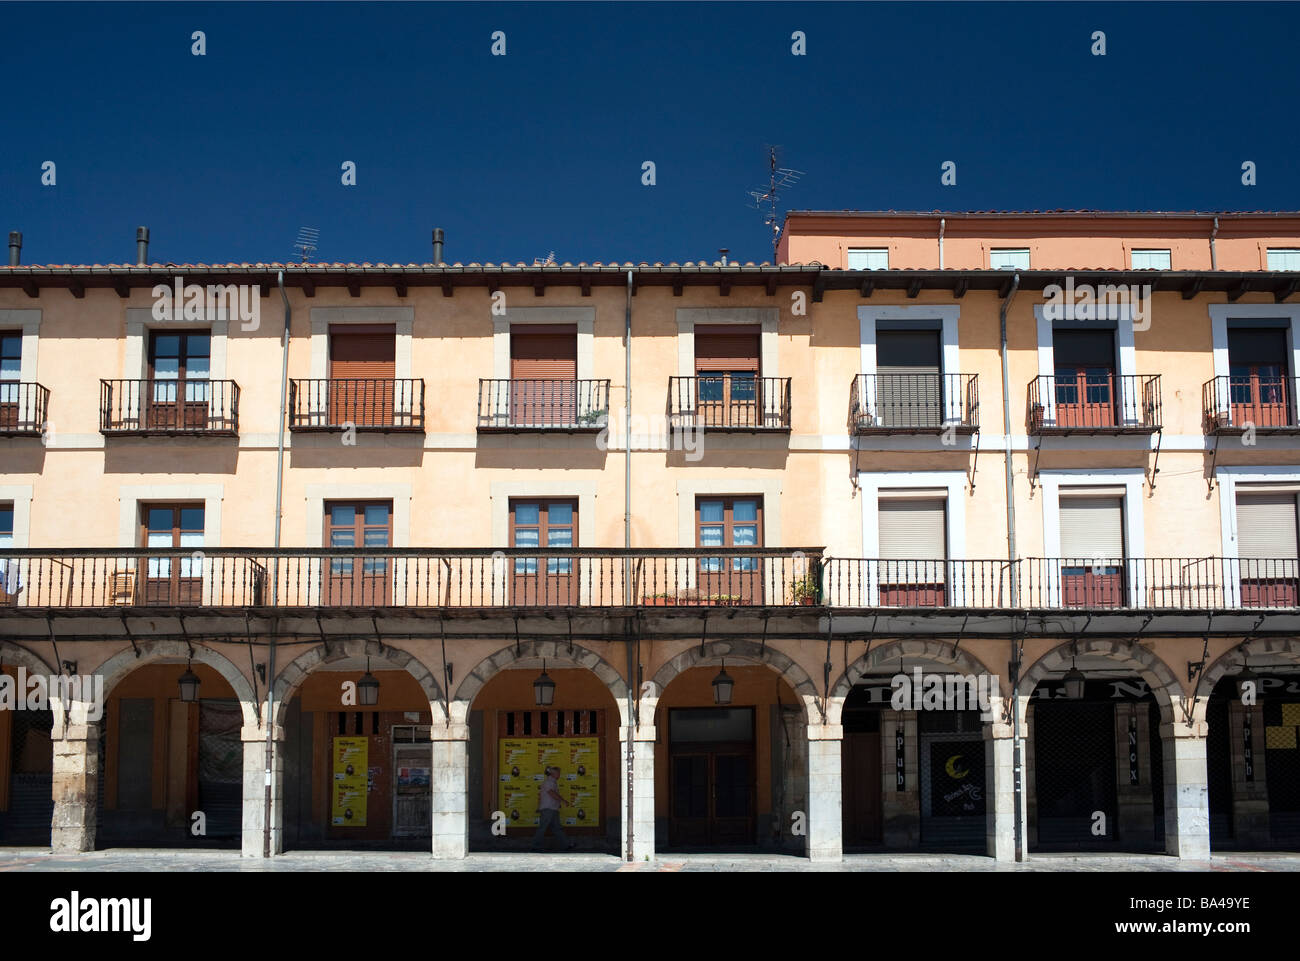 Arcade and traditional houses Plaza Mayor Main Square town of Leon  autonomous community of Castilla y Leon northern Spain Stock Photo - Alamy